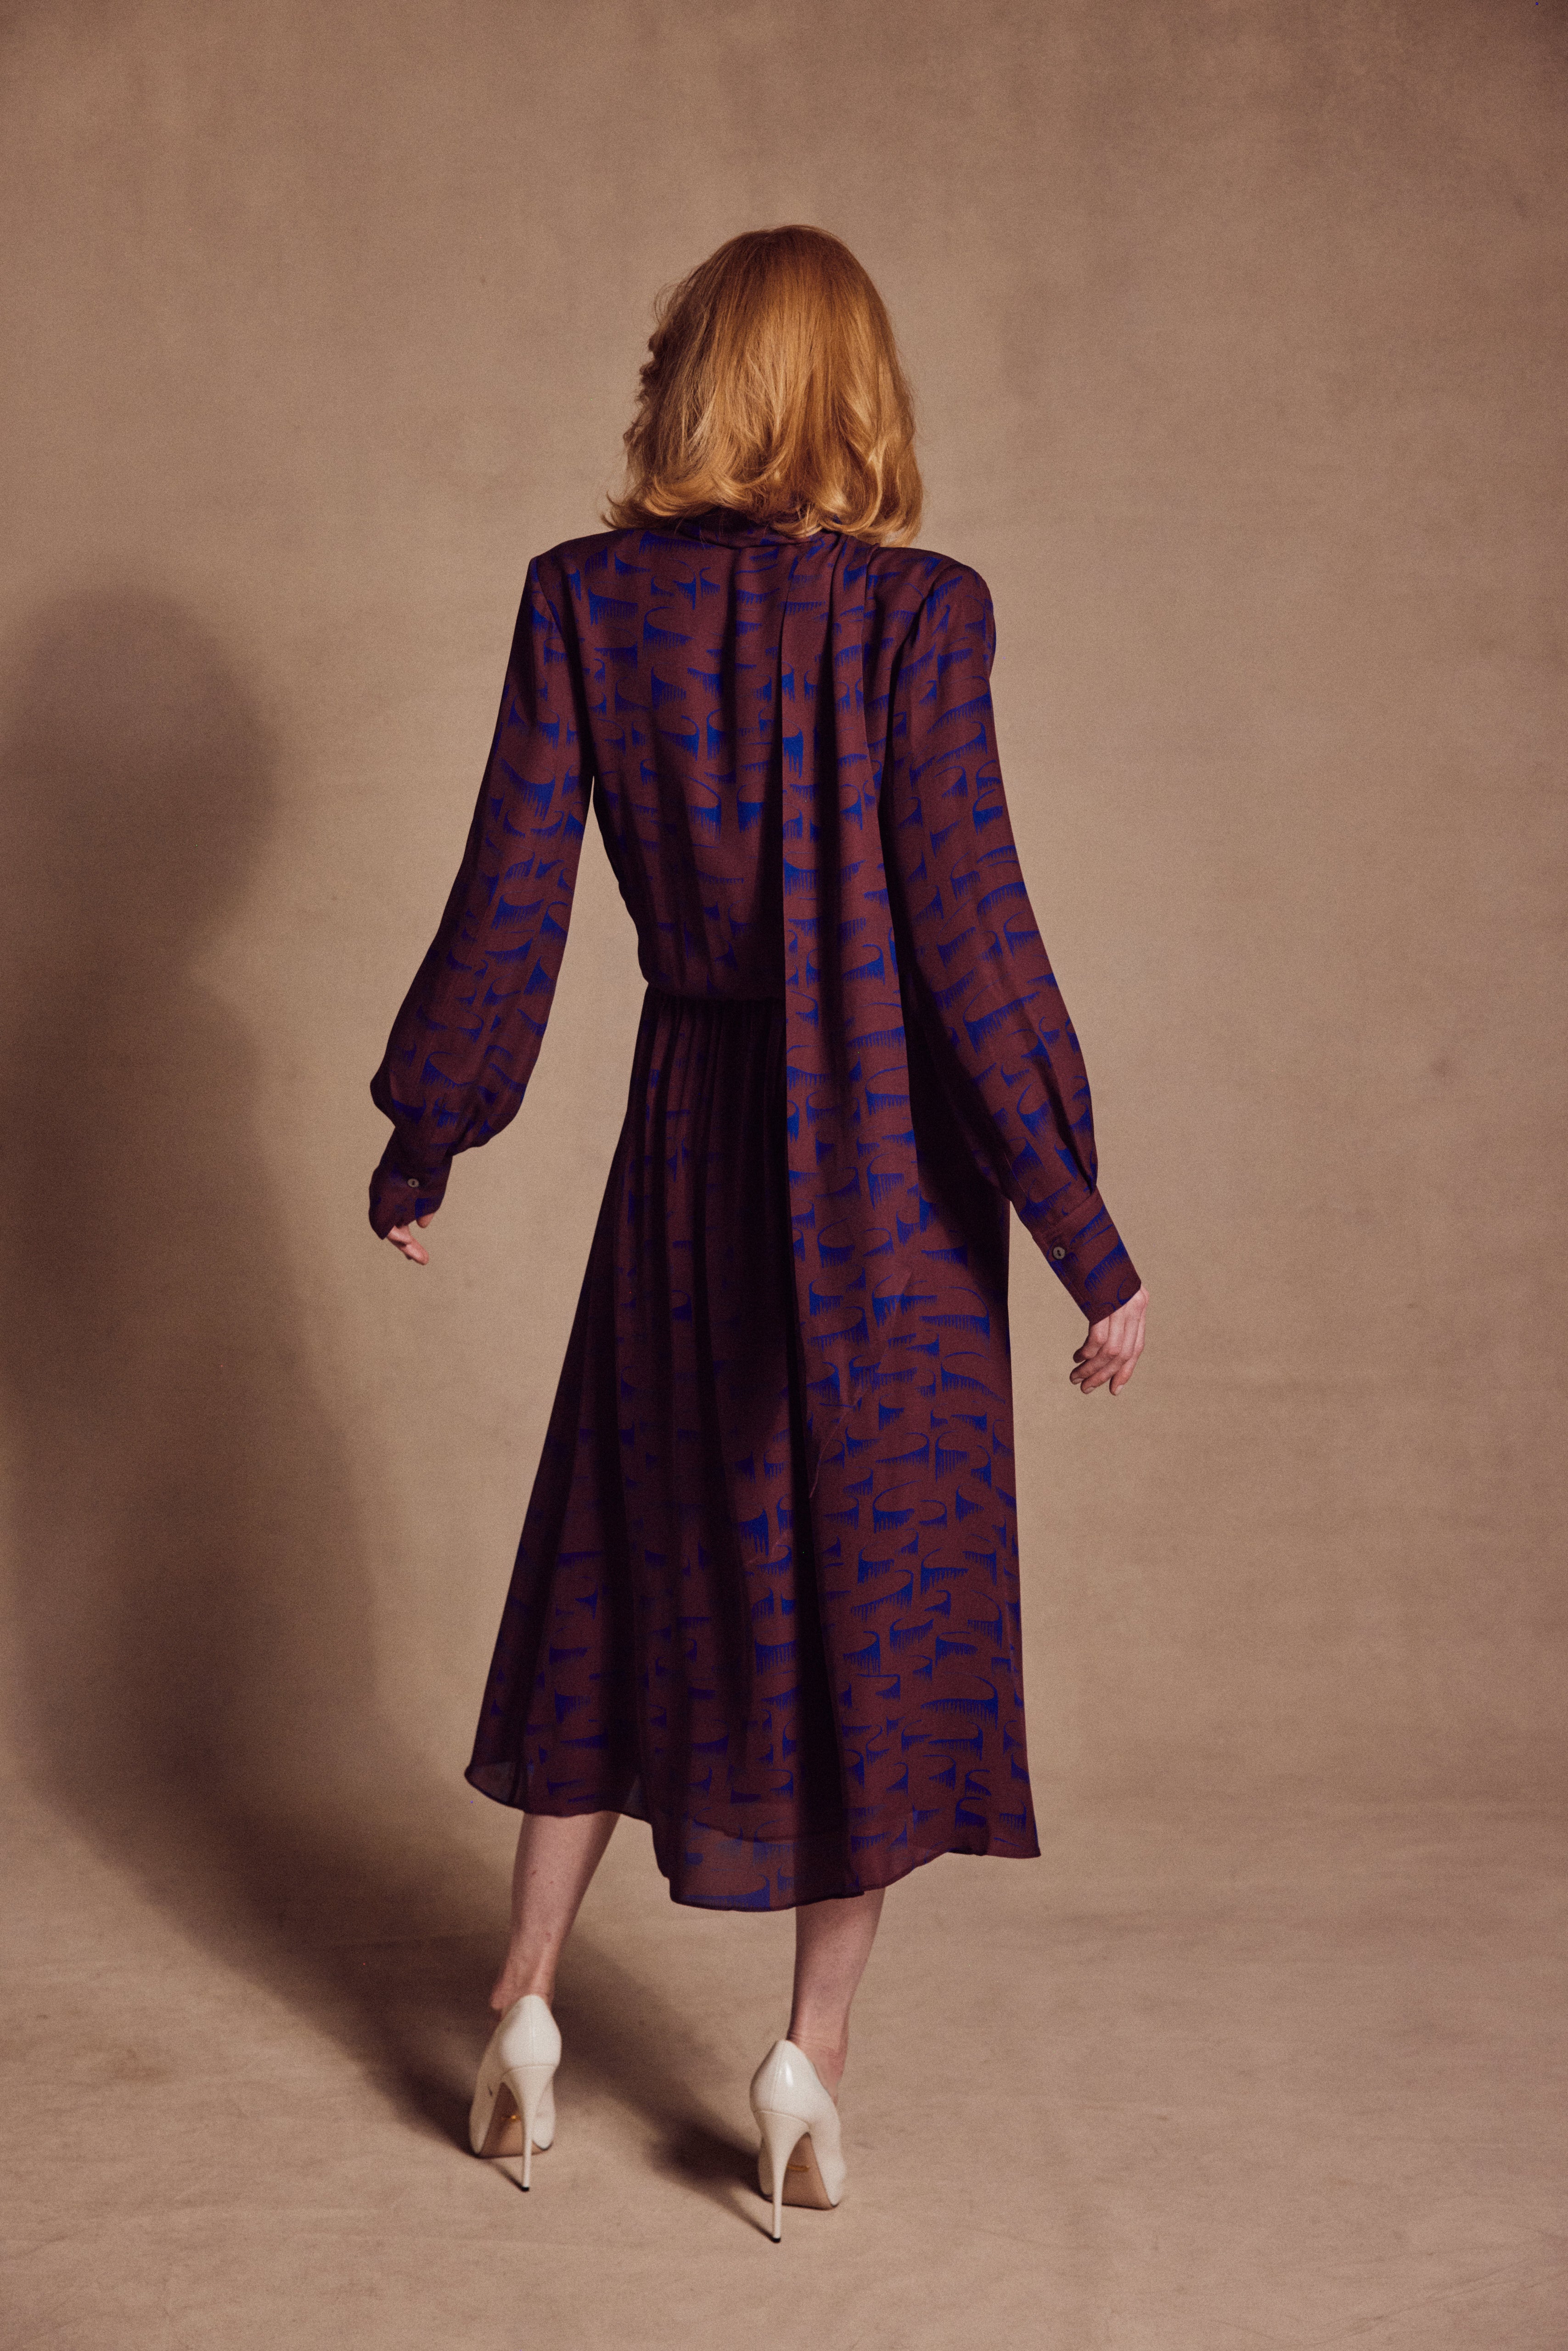 THE MINDY DRESS in bordeaux and blue